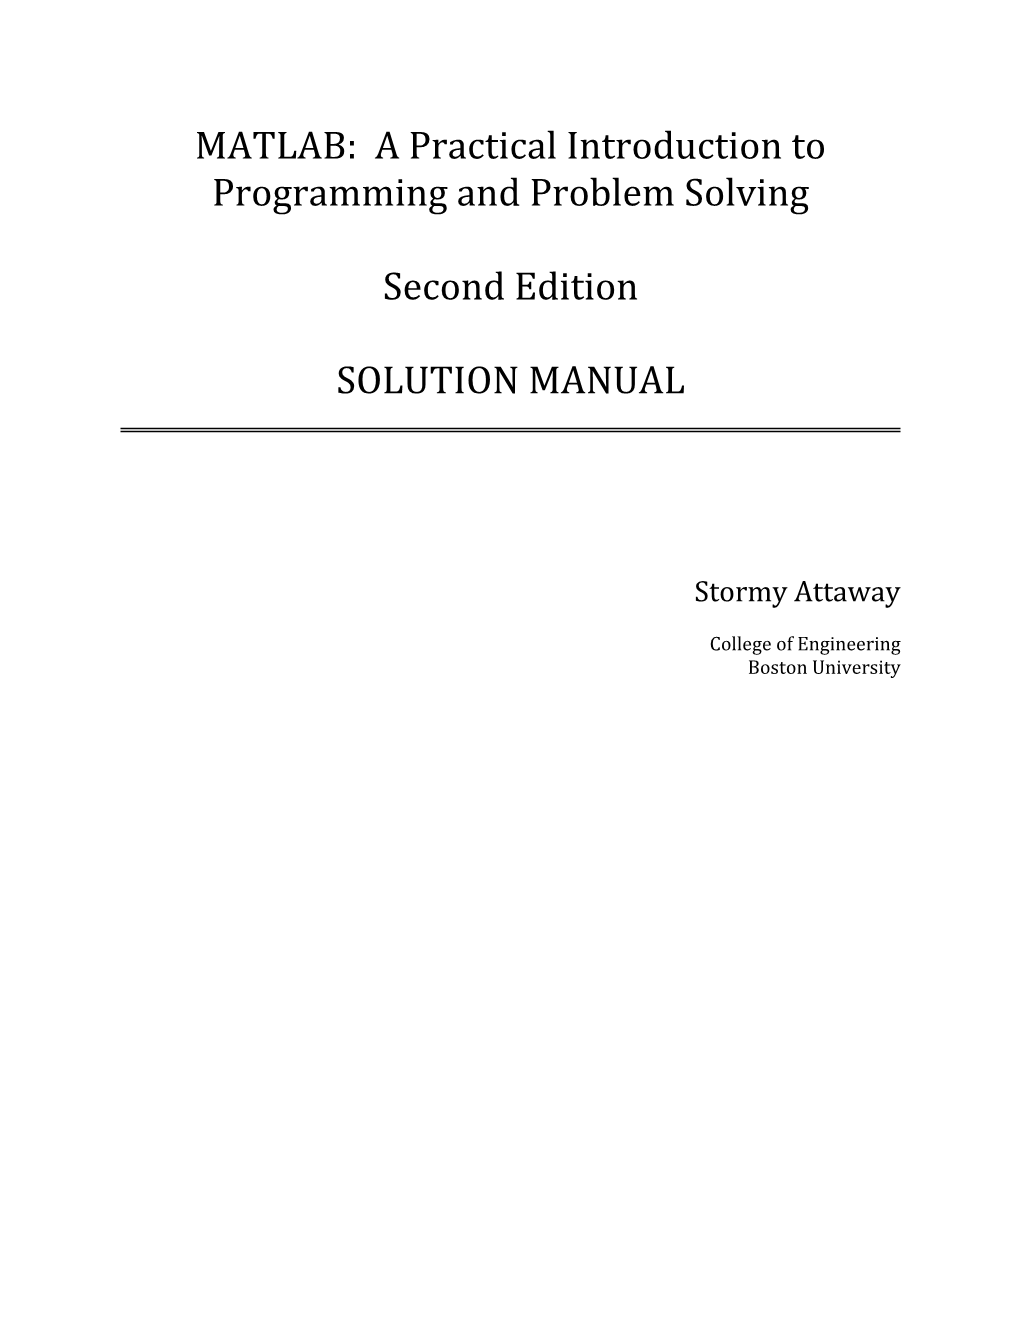 MATLAB: a Practical Introduction to Programming and Problem Solving